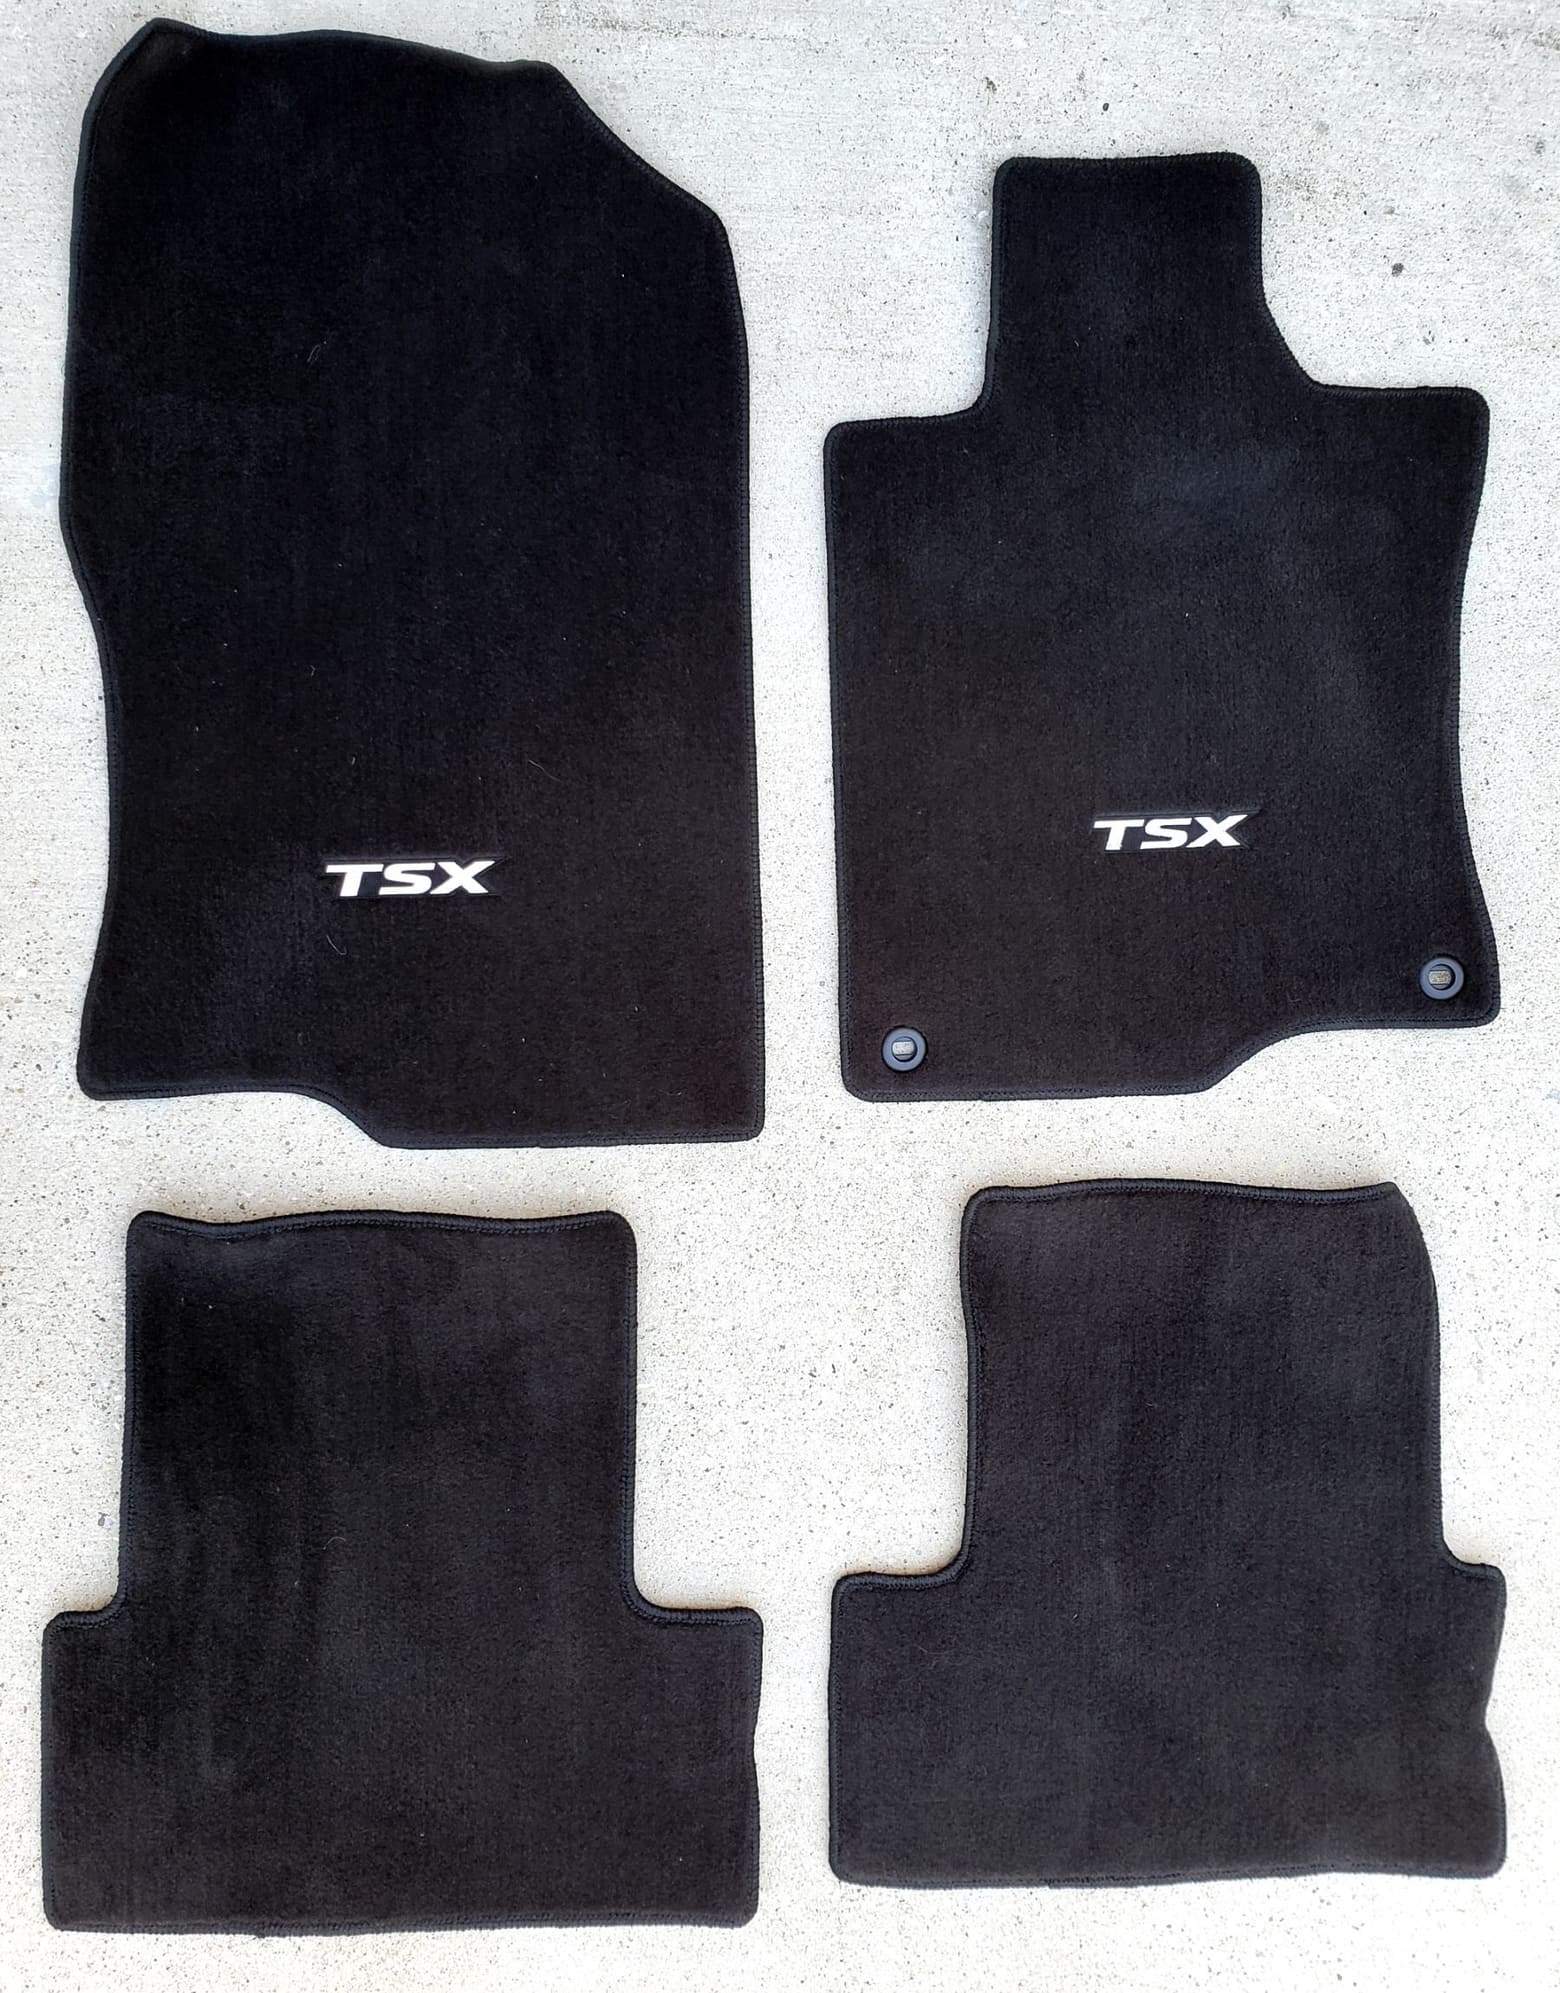 Interior/Upholstery - FS:  Set of carpet mats from 2012 TSX - Used - 2009 to 2014 Acura TSX - Denton, TX 76210, United States